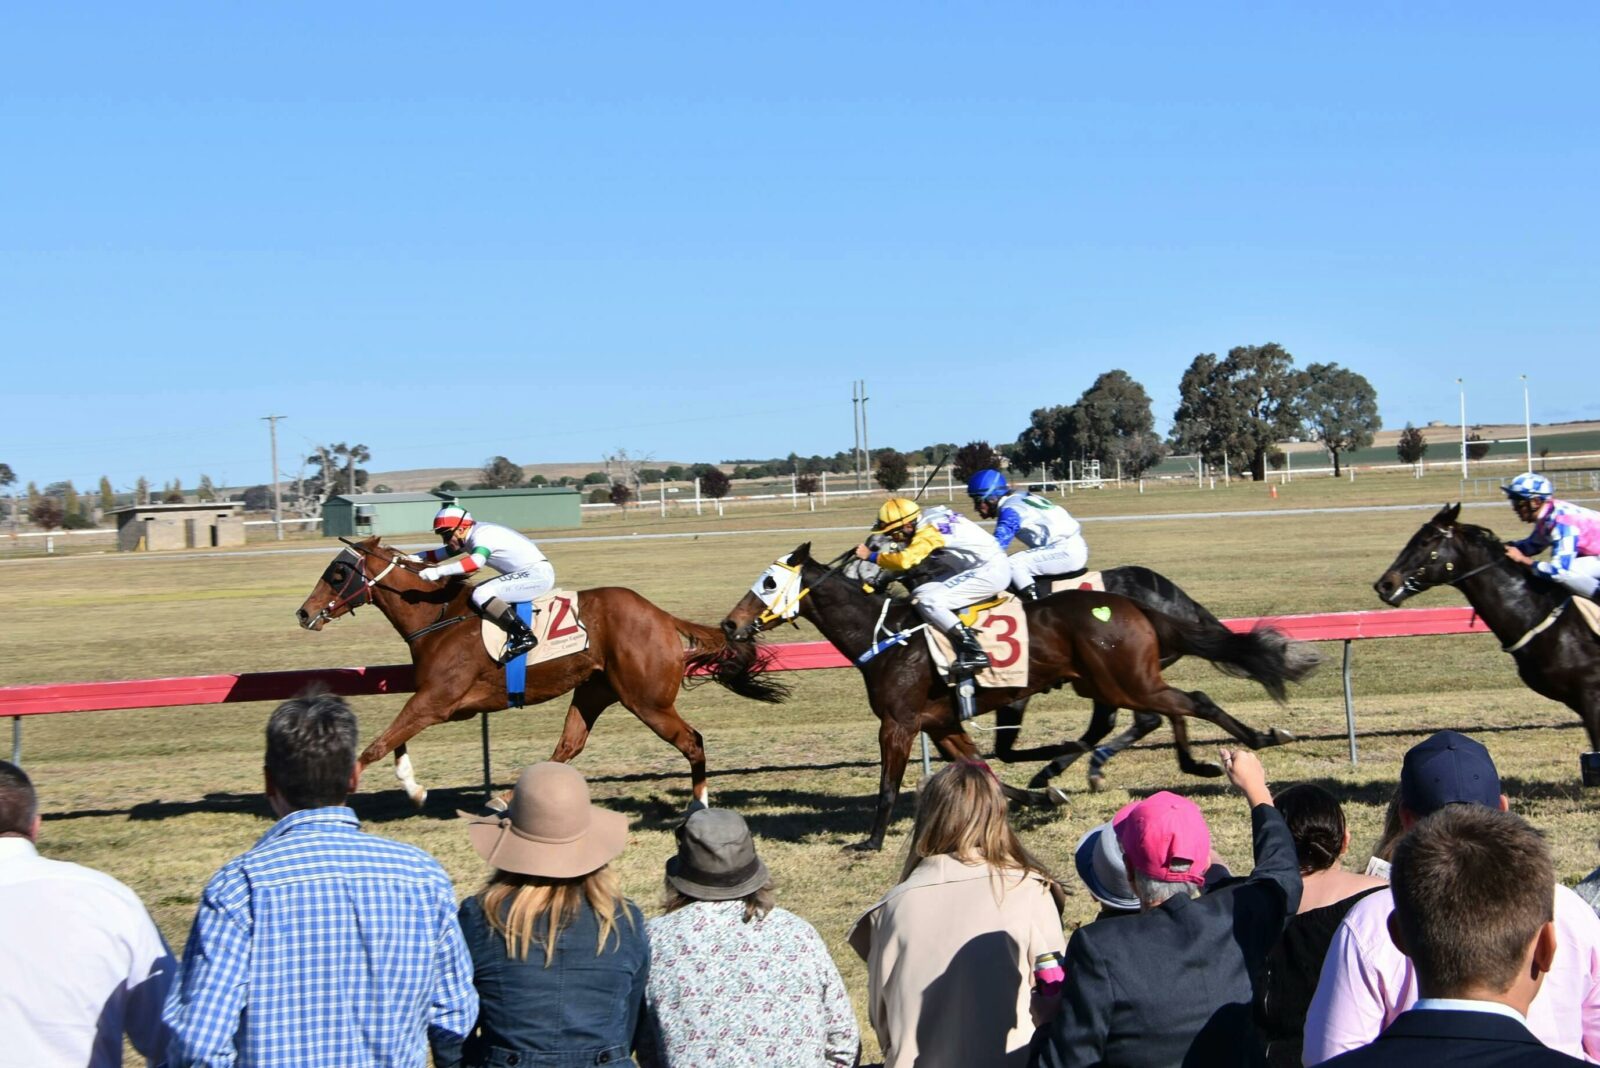 Horses racing with a crowd watching